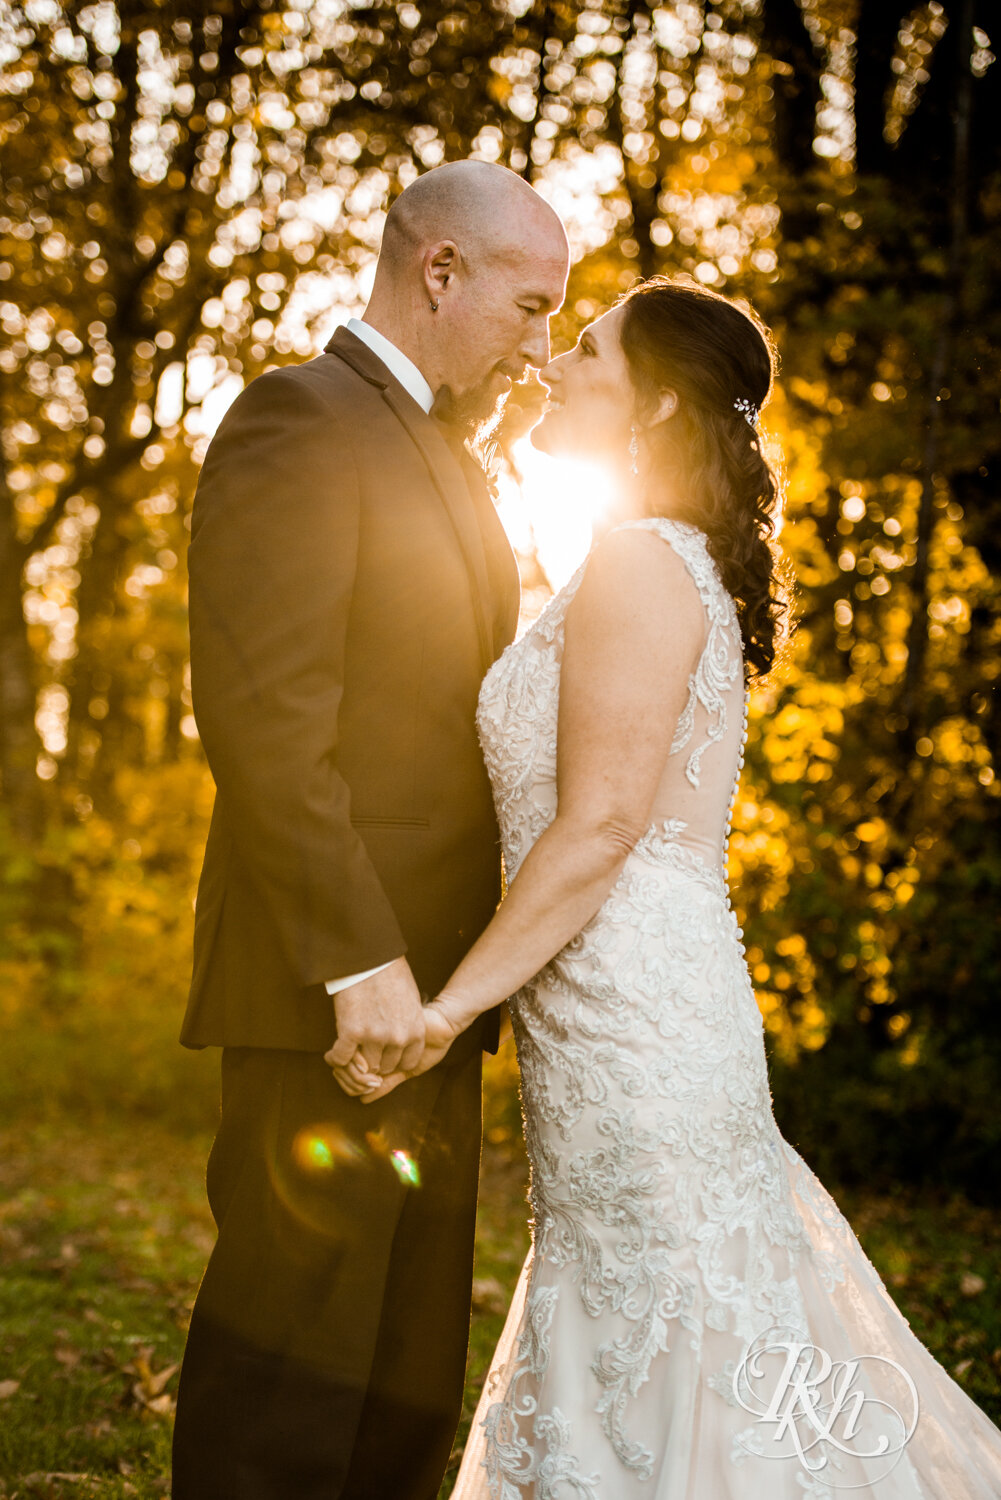 Bride and groom kiss in woods with fall colors at sunset at Minnesota Horse and Hunt Club in Prior Lake, Minnesota.